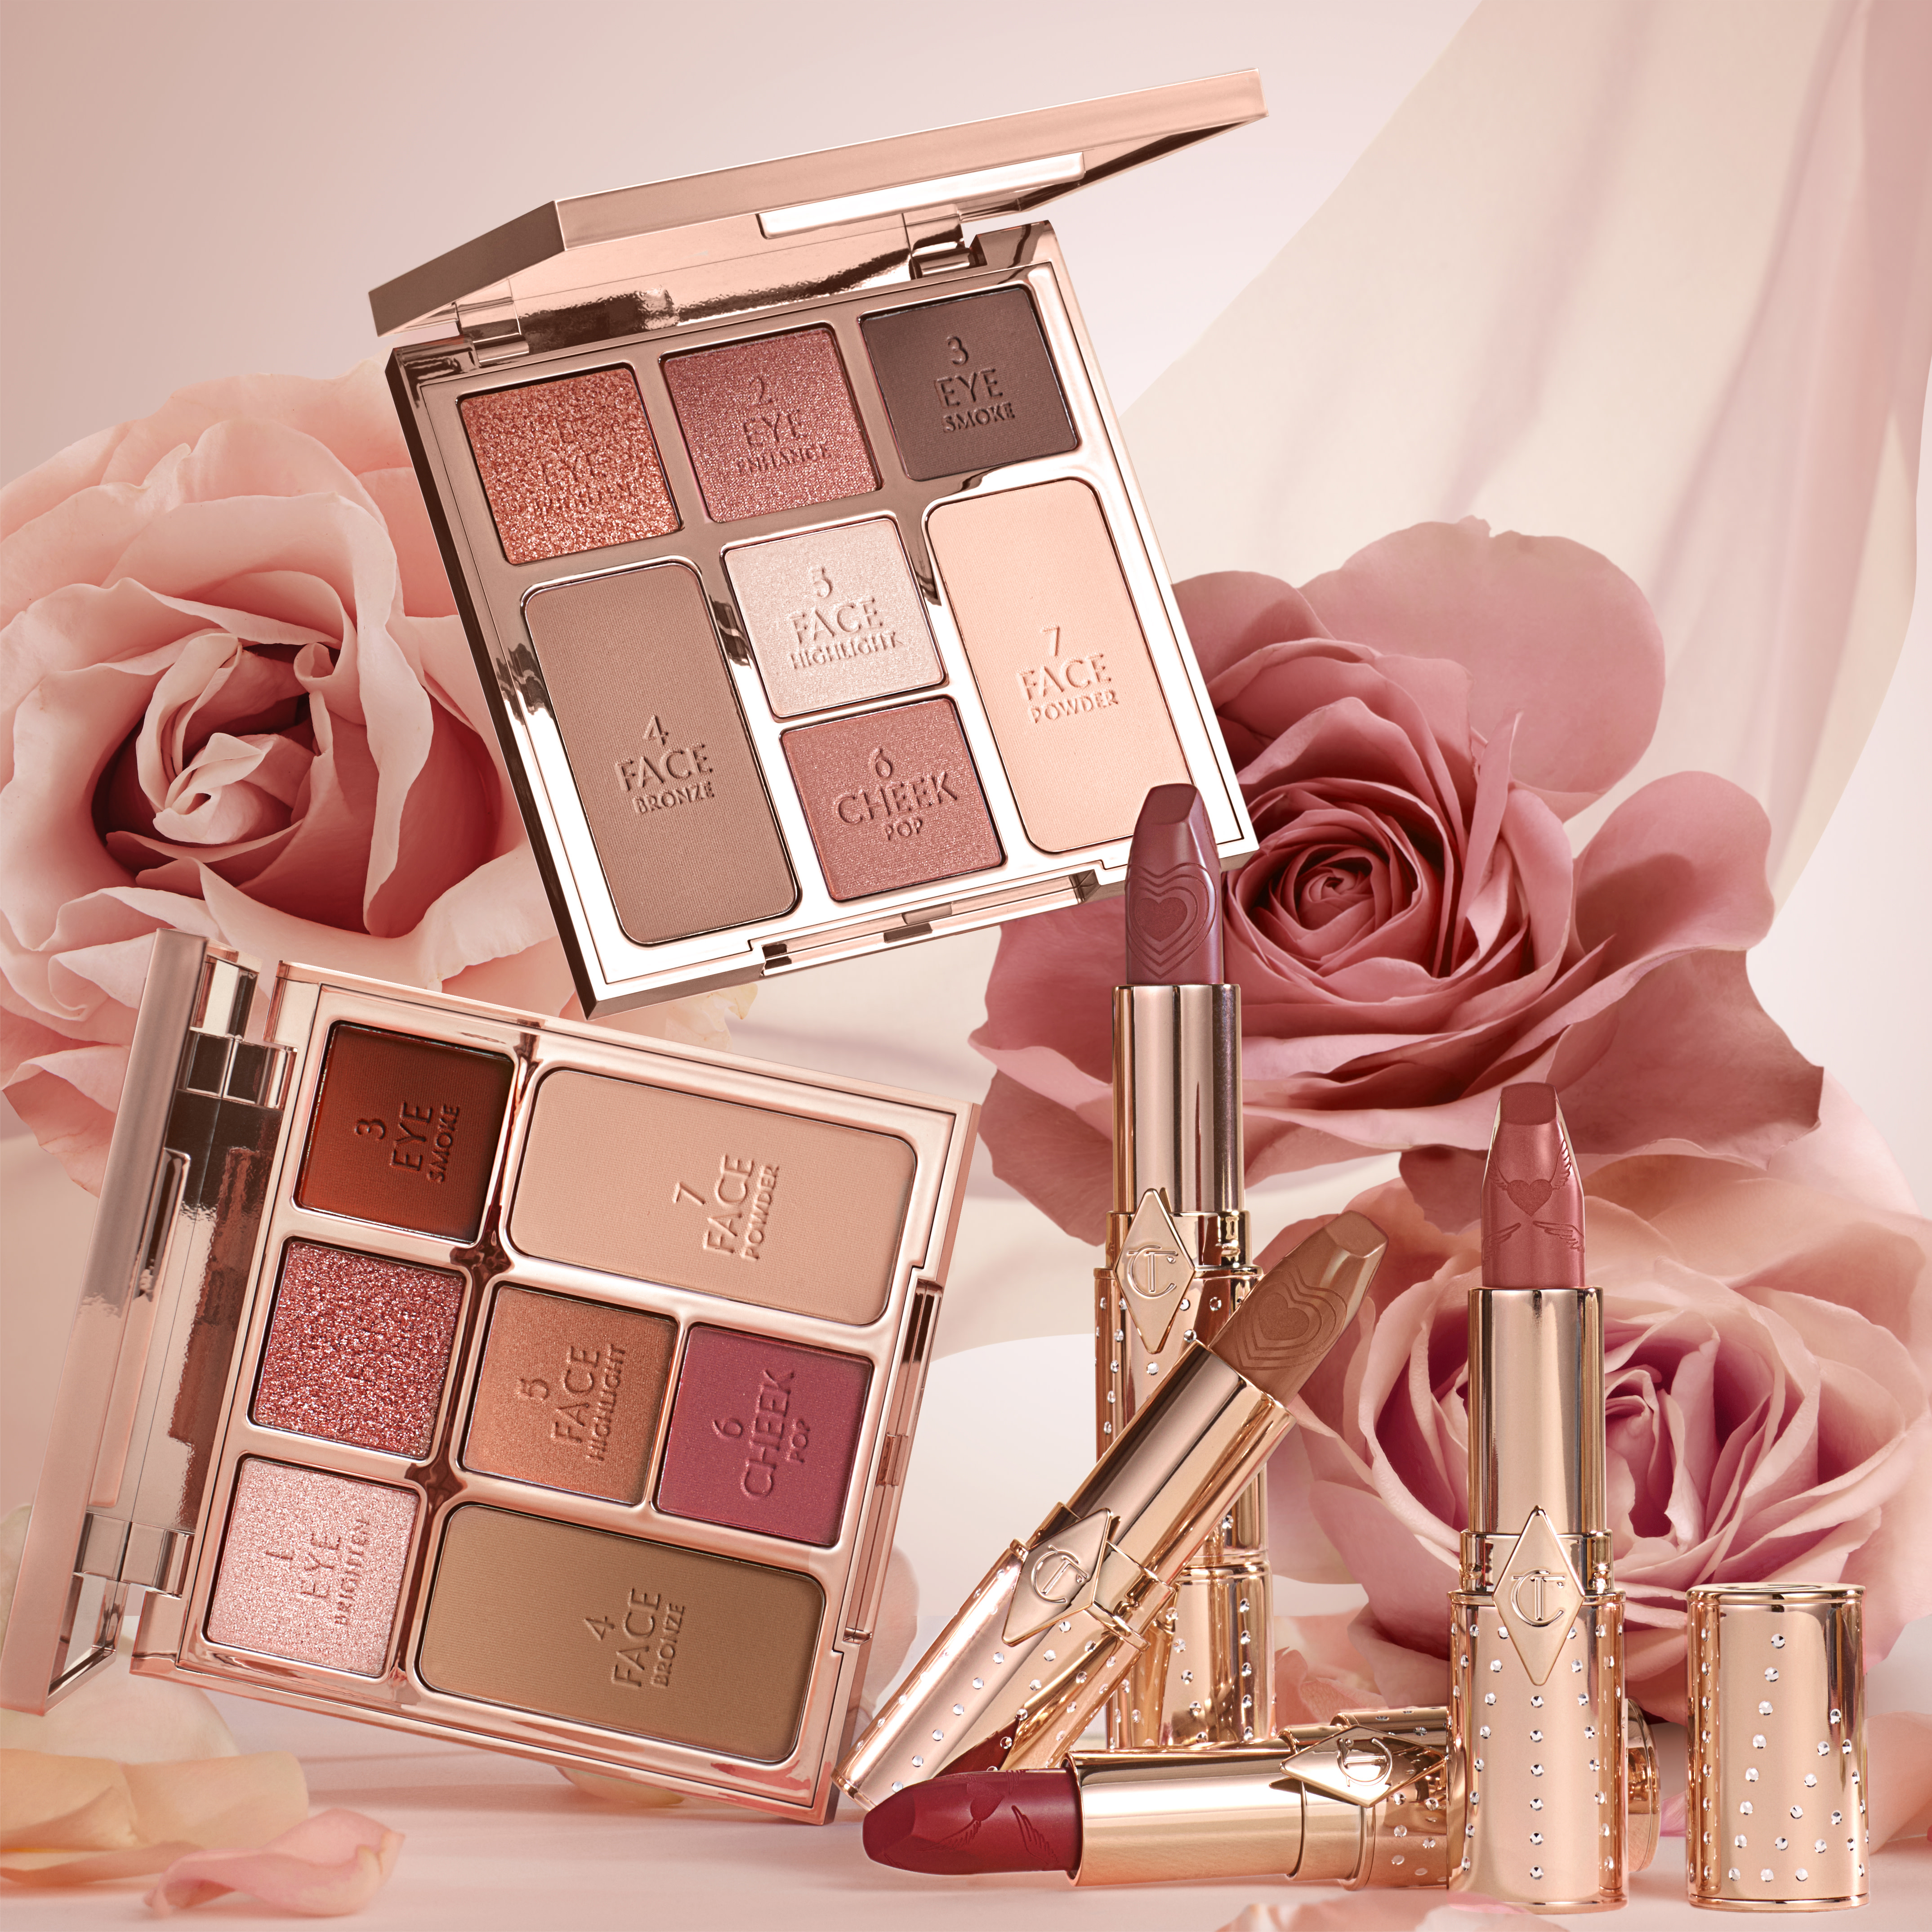 Two, open face palettes for fair to medium and medium to deep-tones with three eyeshadows, two blushes, and contour powders along with four nude lipsticks in shades of brown, peach, pink, and red.